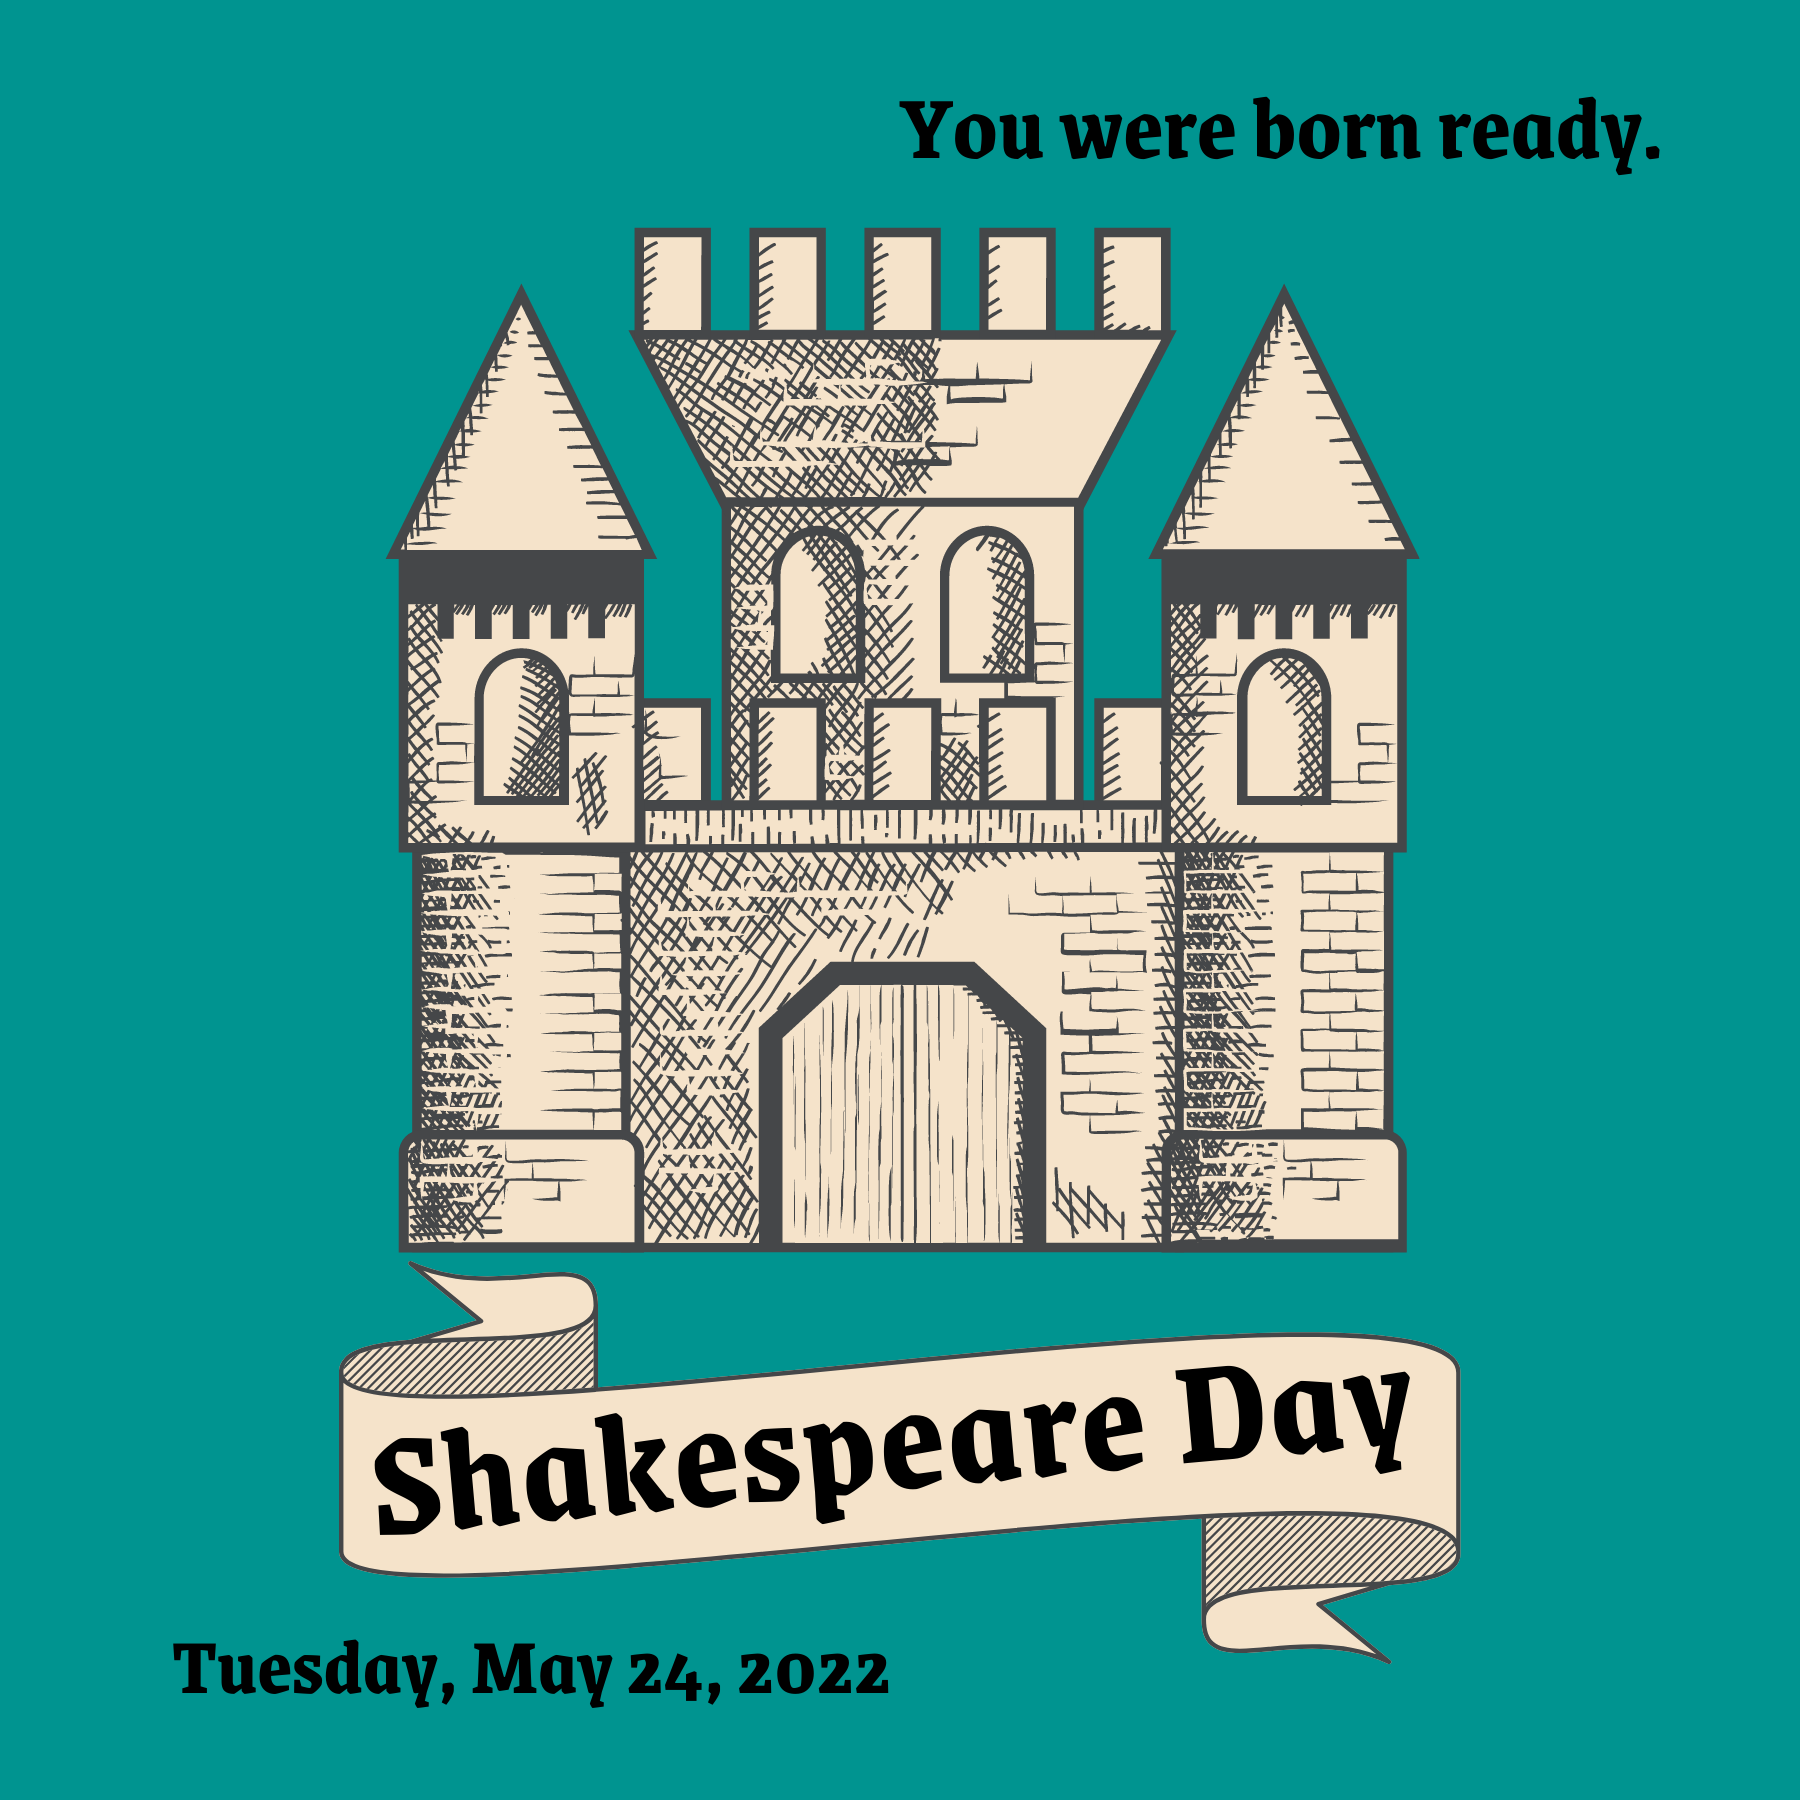 Shakespeare Day is Tuesday, May 24, 2022